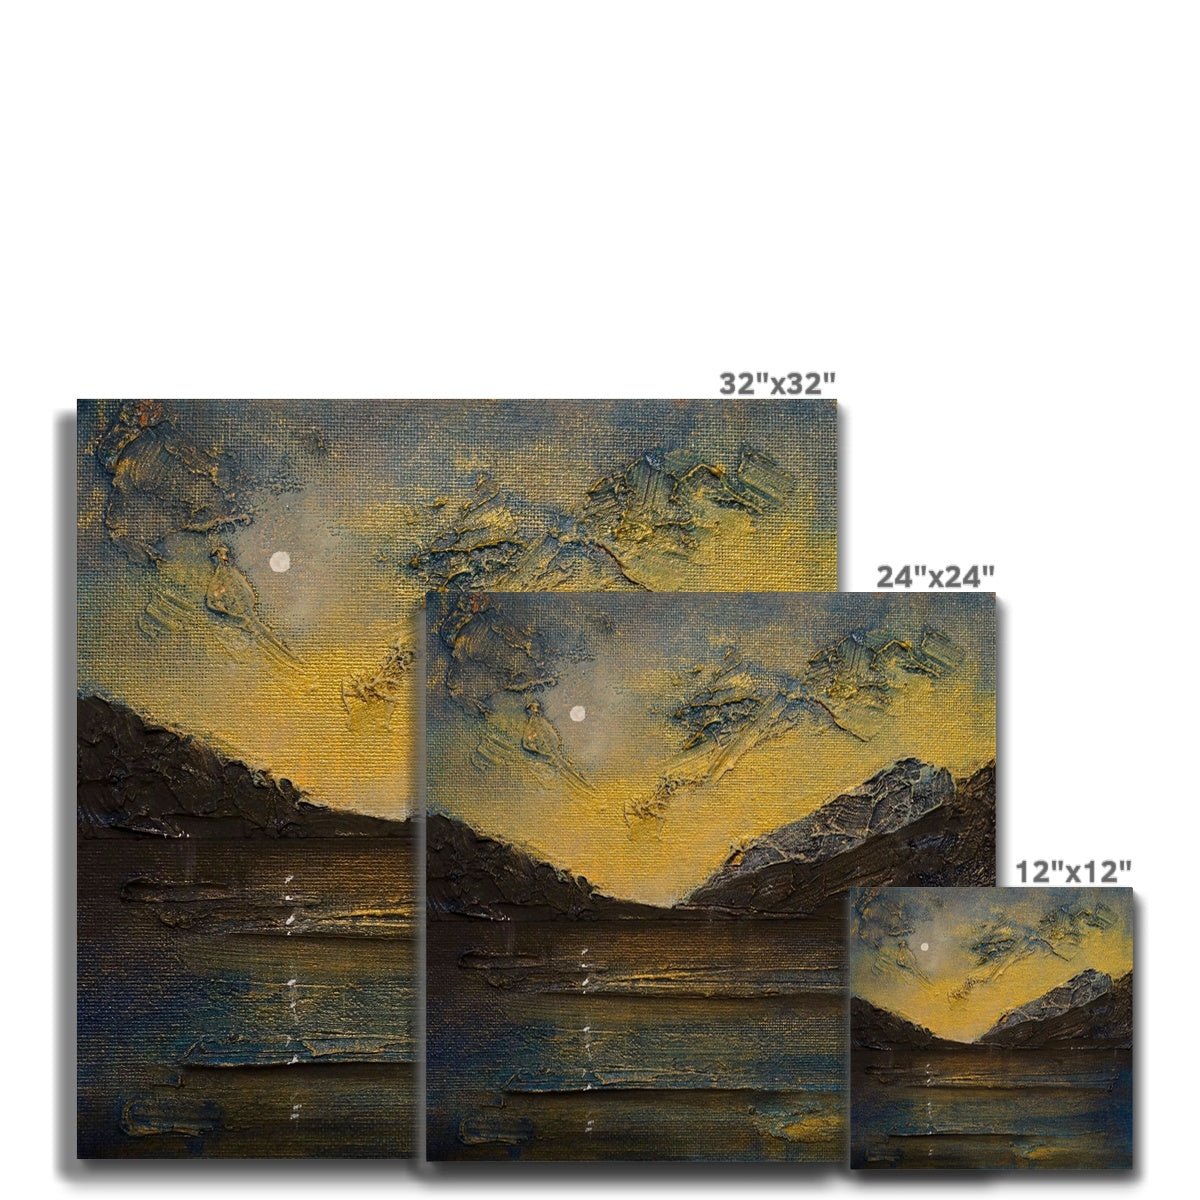 Loch Lomond Moonlight Painting | Canvas From Scotland-Contemporary Stretched Canvas Prints-Scottish Lochs & Mountains Art Gallery-Paintings, Prints, Homeware, Art Gifts From Scotland By Scottish Artist Kevin Hunter